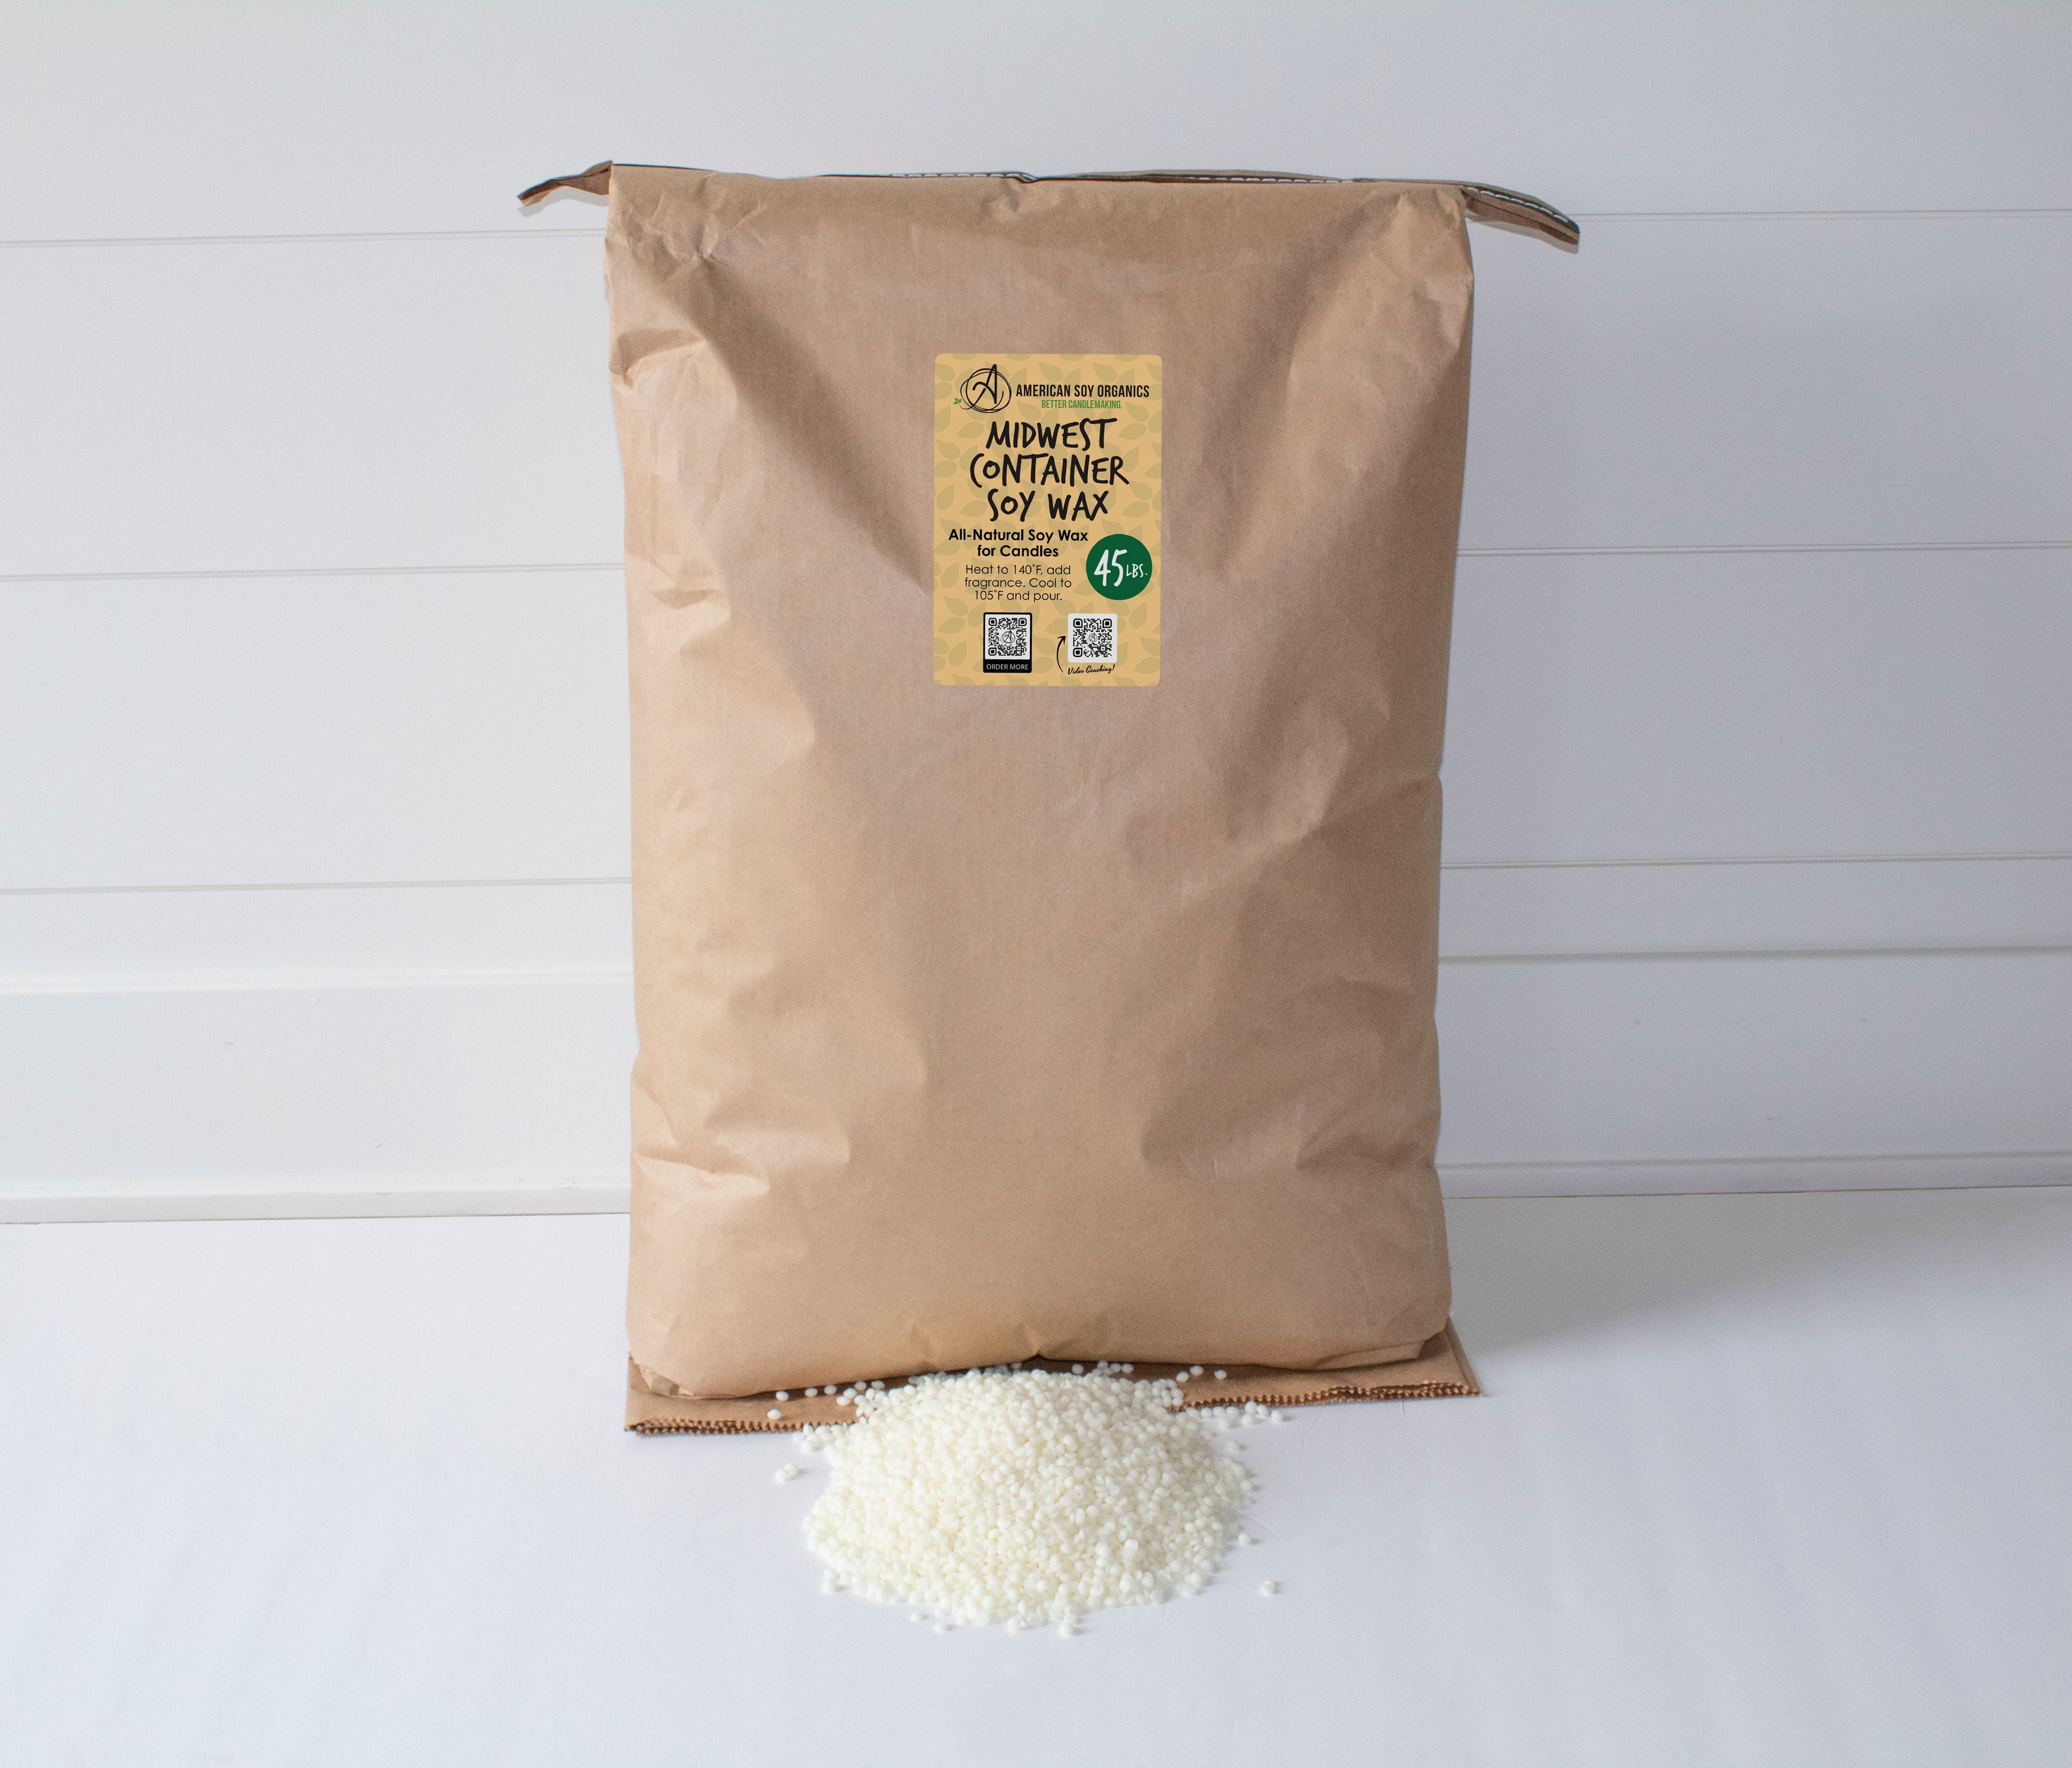 American Soy Organics - 100% Midwest Soy Container Wax Beads for Candle  Making, 10 lb Bag 10 pound bag